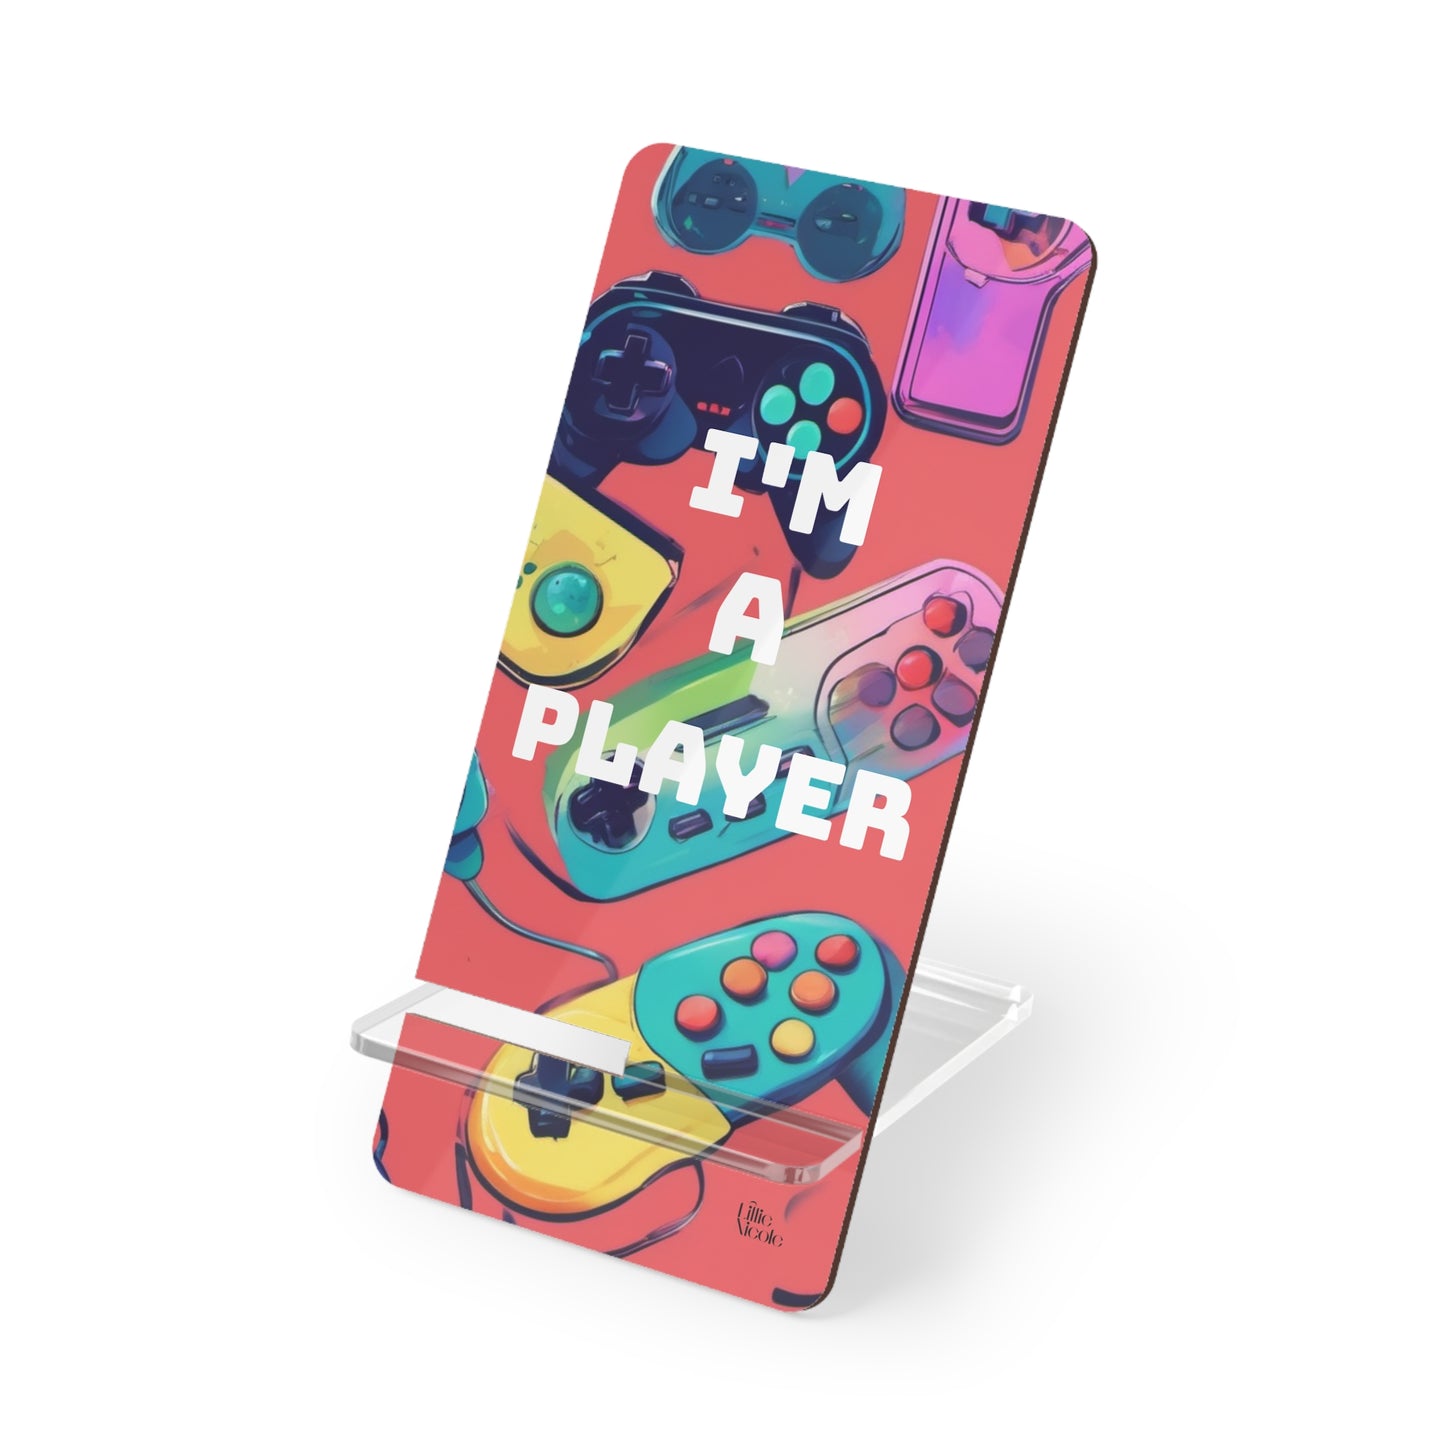 "I'm a player" Phone Stand